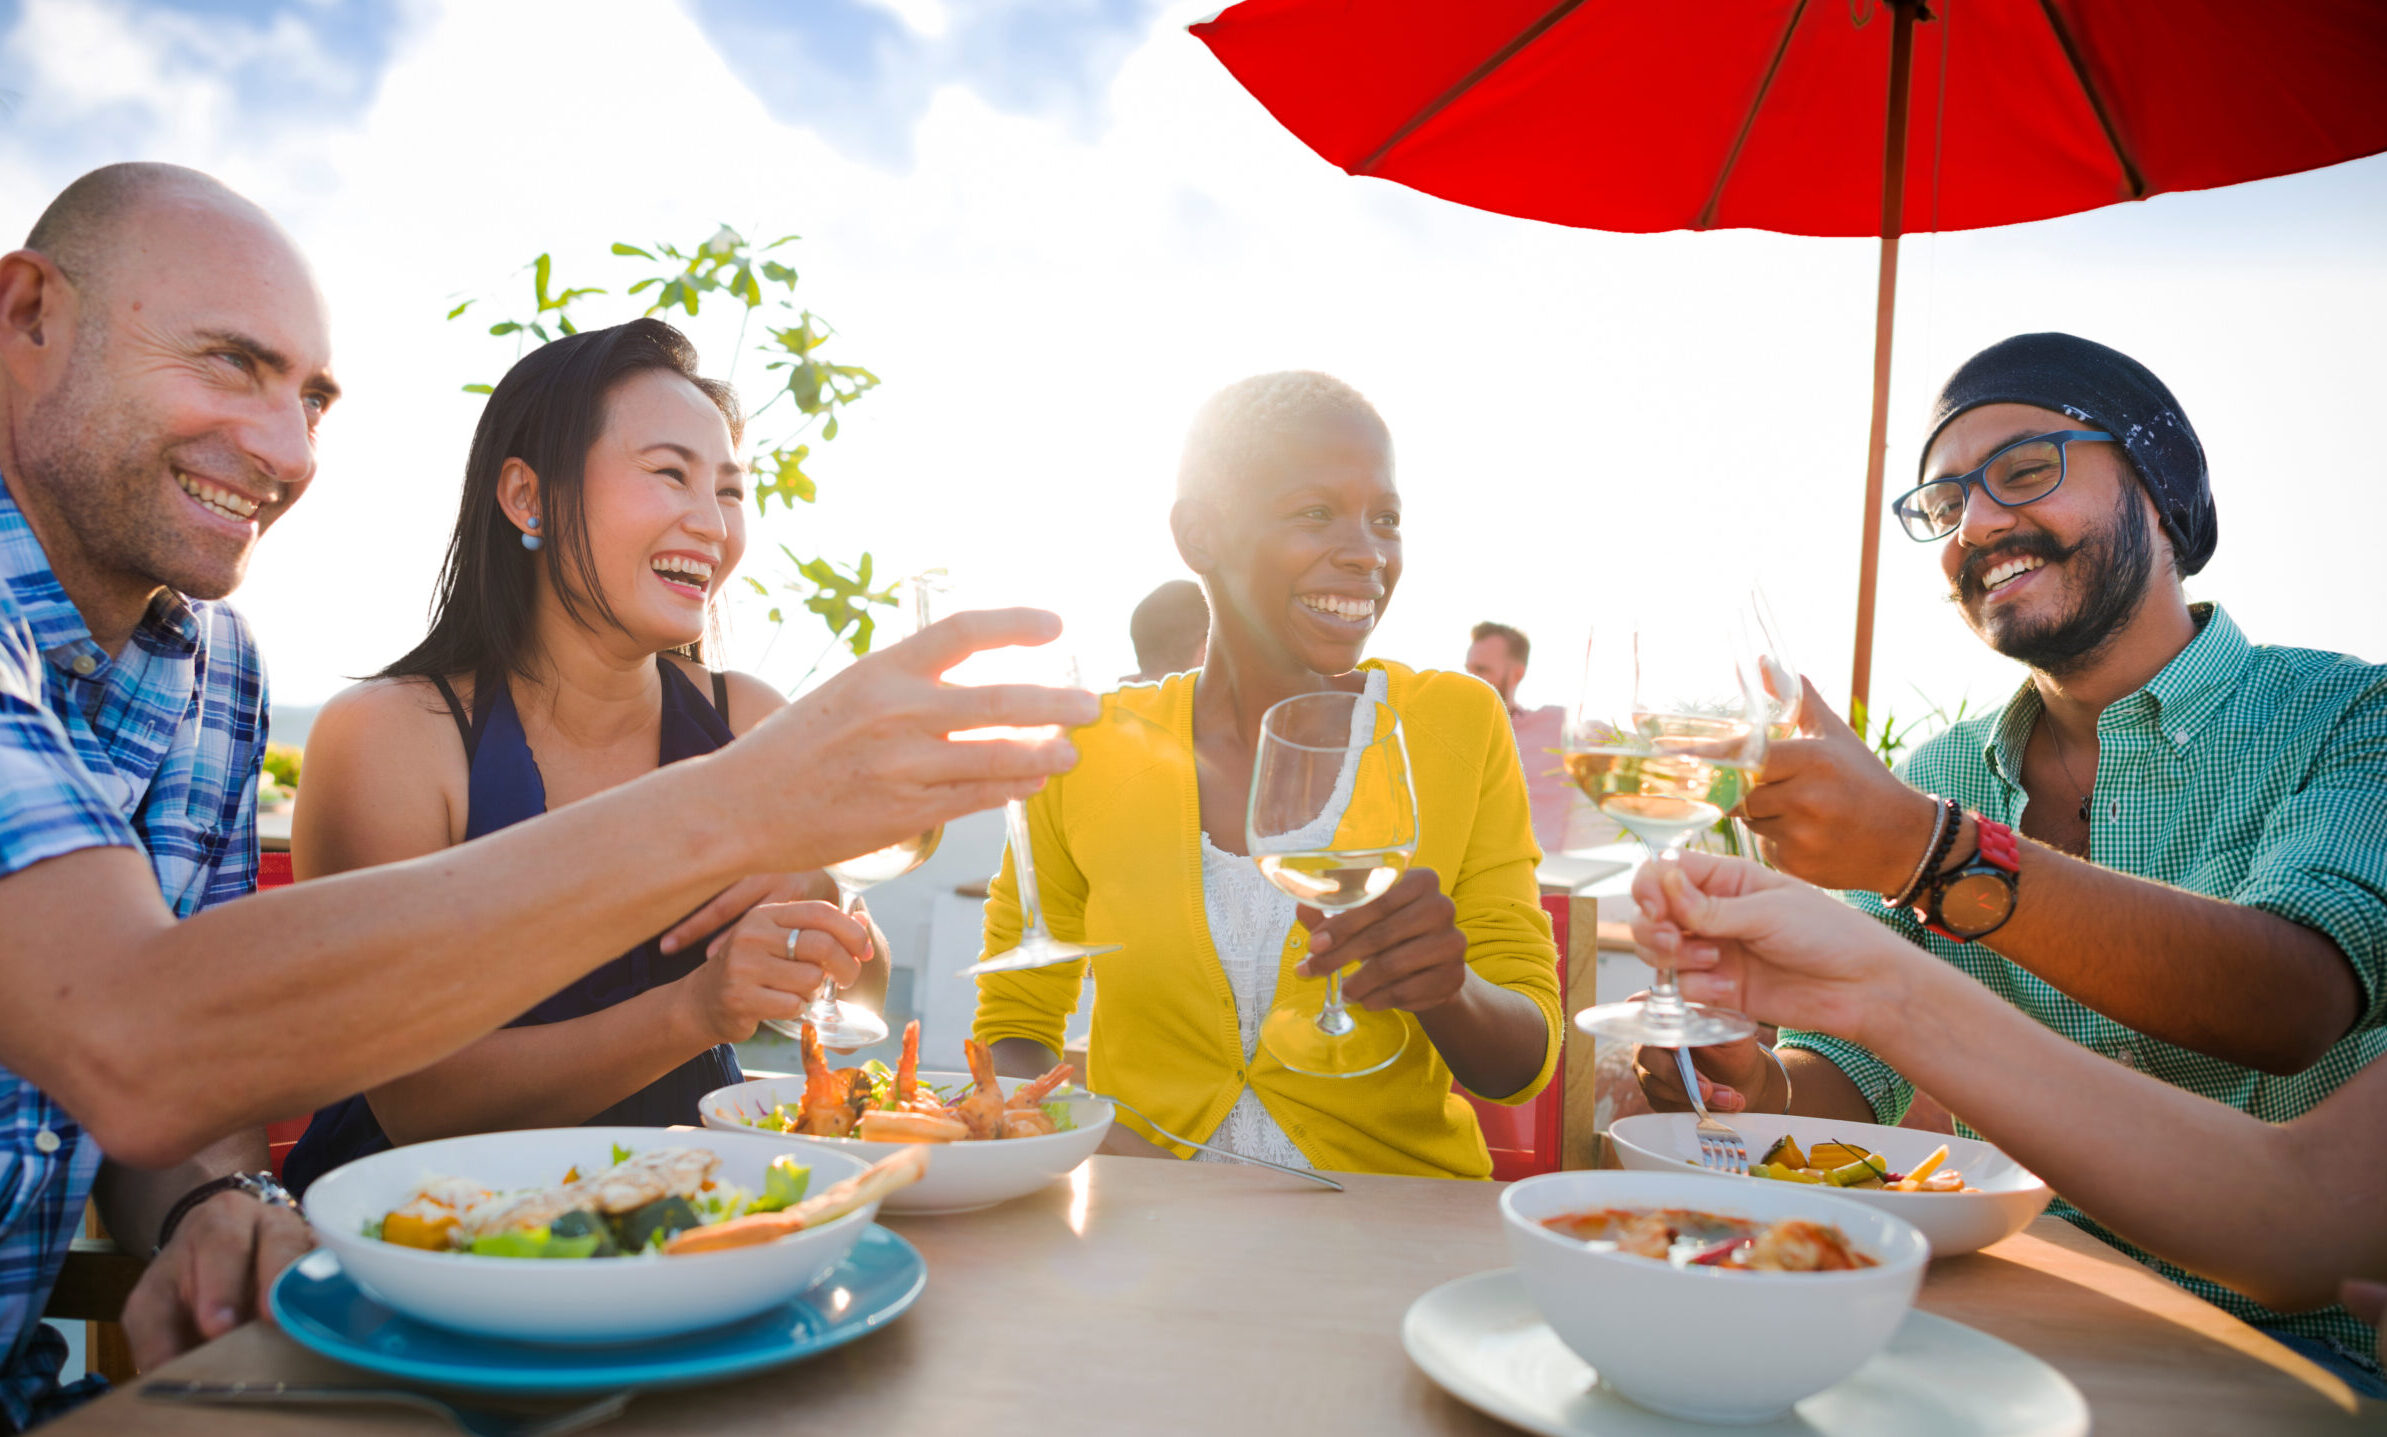 Group of happy people eating at a table